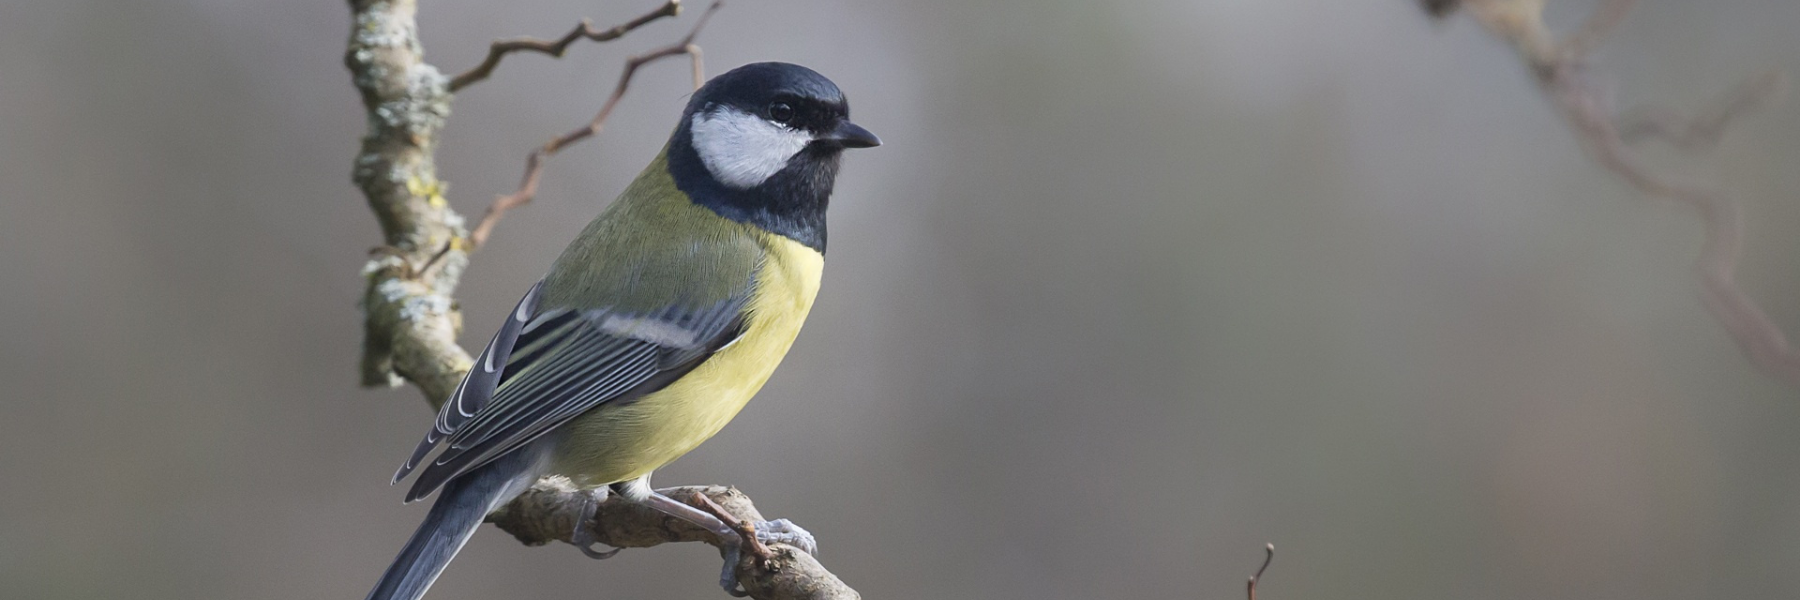 Beginners Guide to Identifying Birds in Your Backyard Feeder-reading vintage blog article